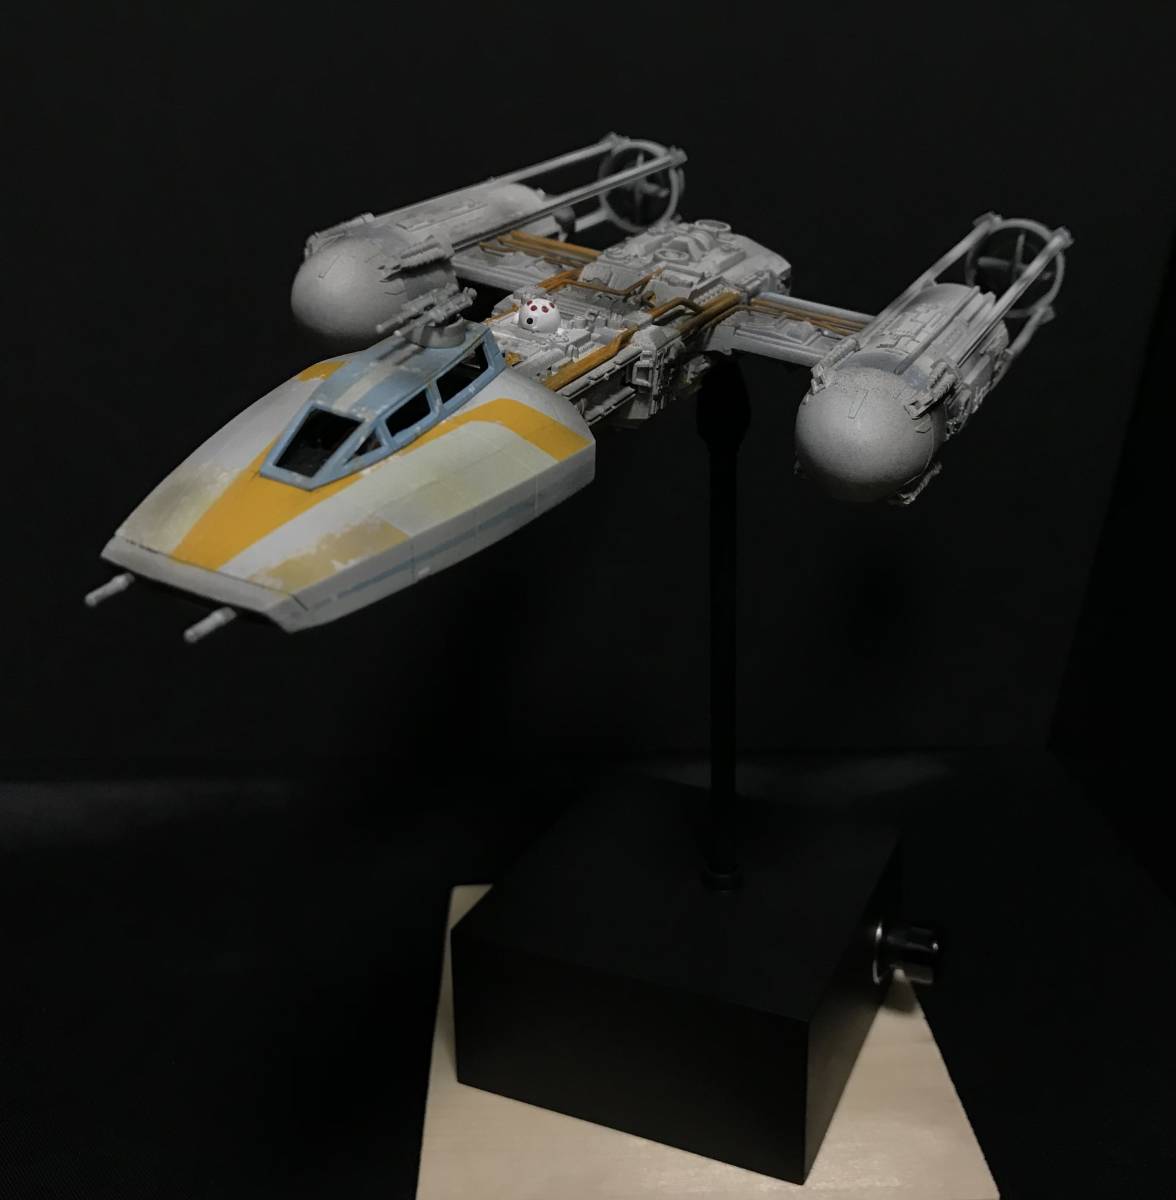 Equipped with a microcomputer, illuminated, painted, finished product, prop reproduction, Gold 2, Fine Molds, 1/72 Y-Wing, Star Wars, plastic model, movie, SF model, Plastic Models, character, Star Wars